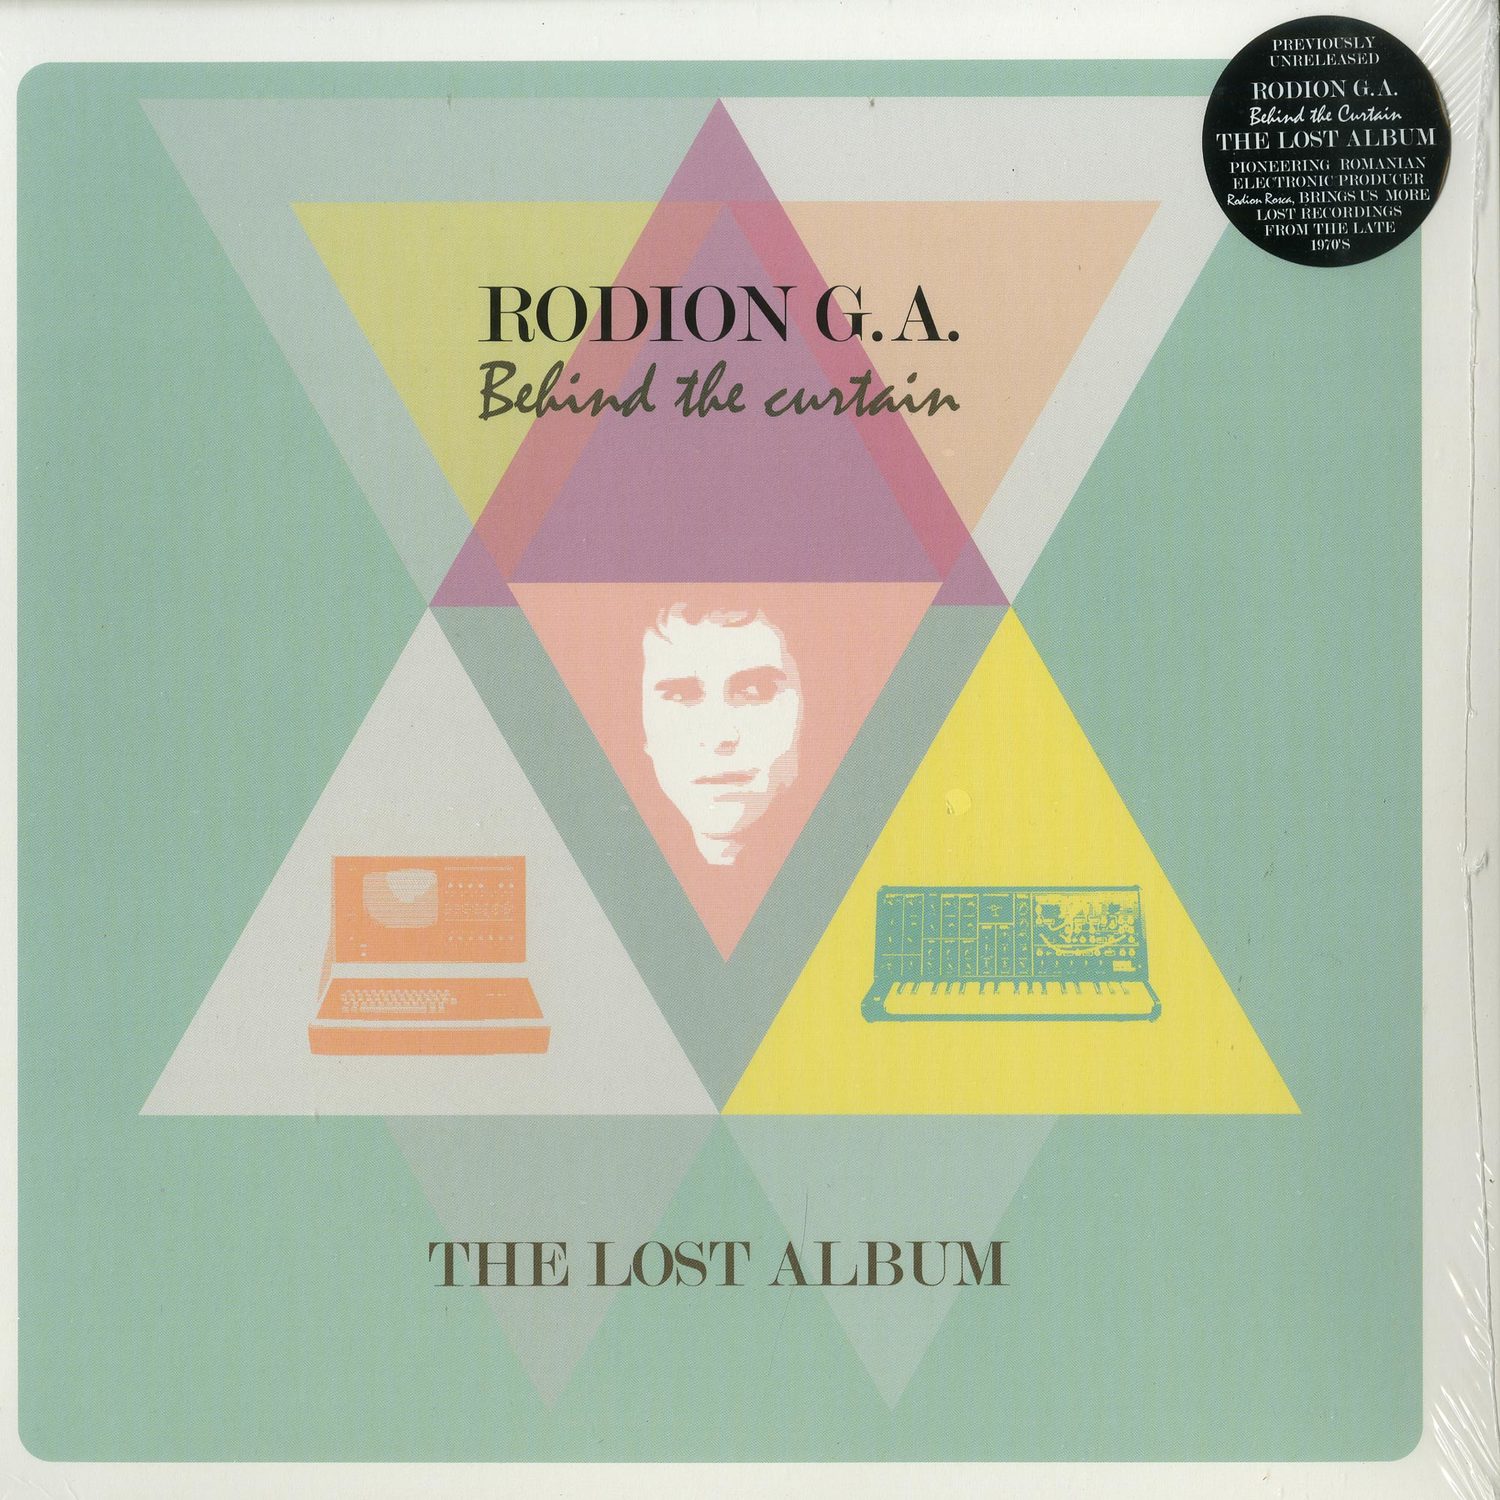 Rodion G.A. - BEHIND THE CURTAIN - THE LOST ALBUM 